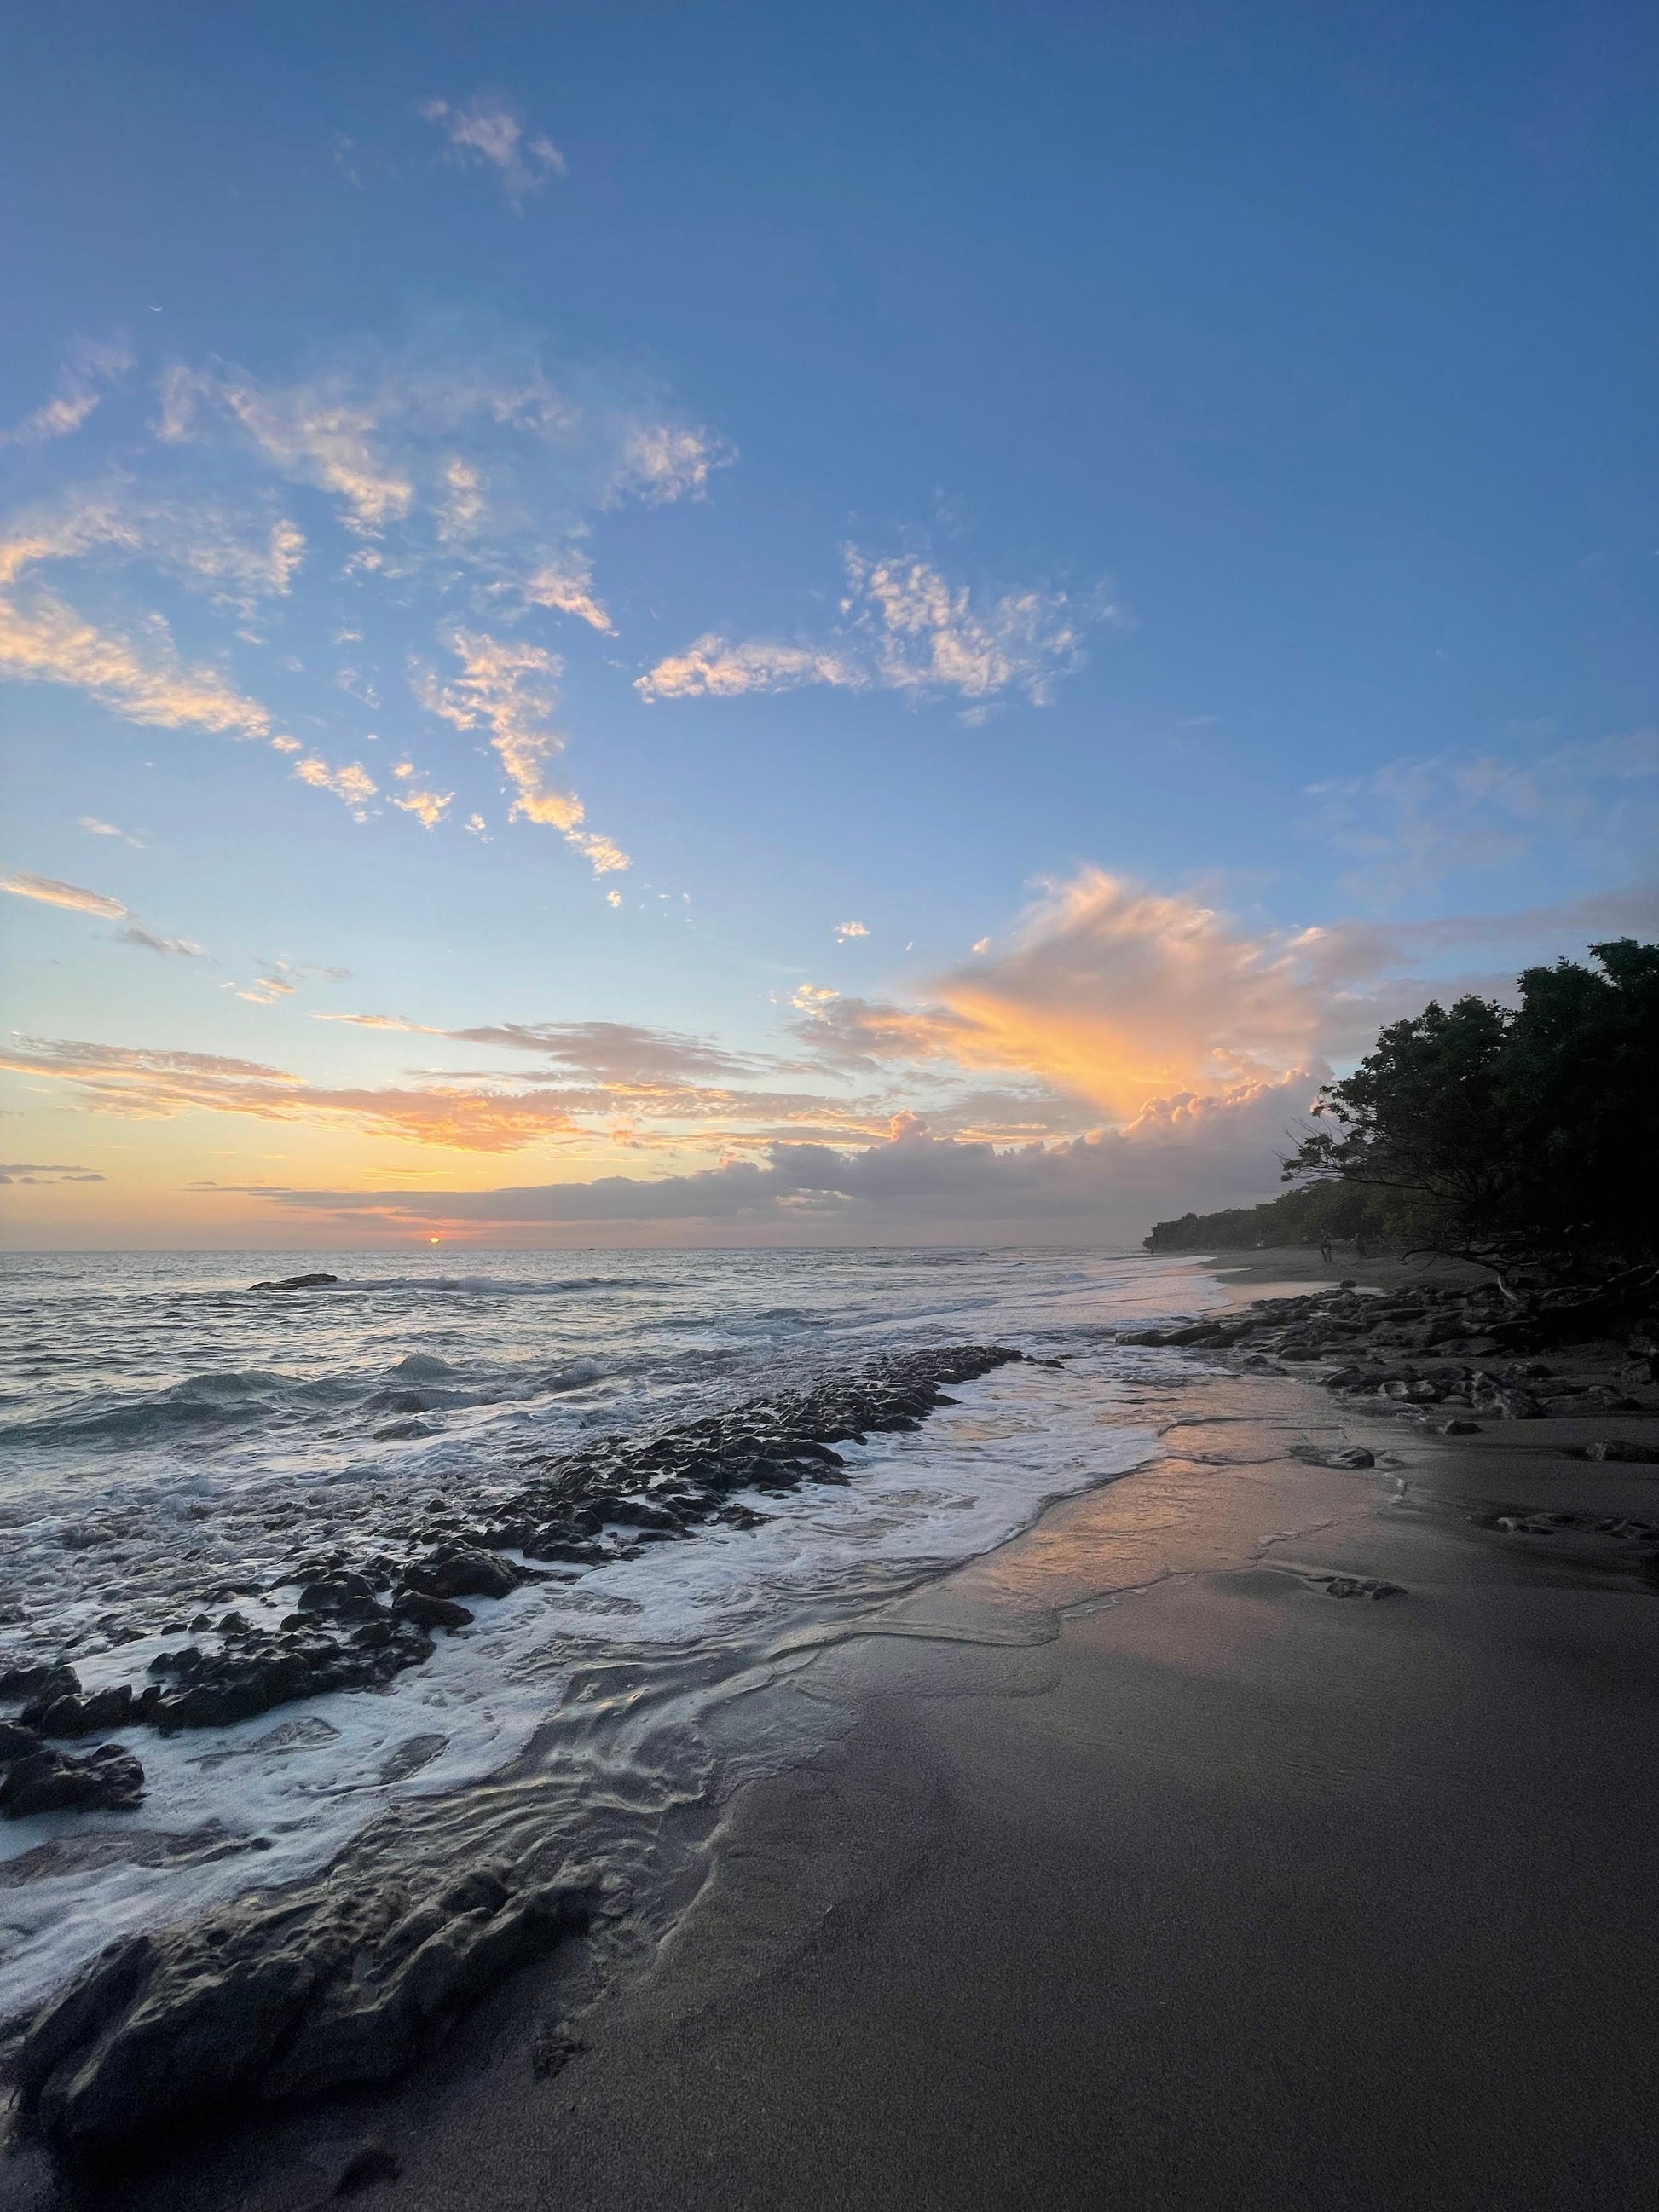 Sunset on the coast of Tamarindo Costa Rica during small group travel.